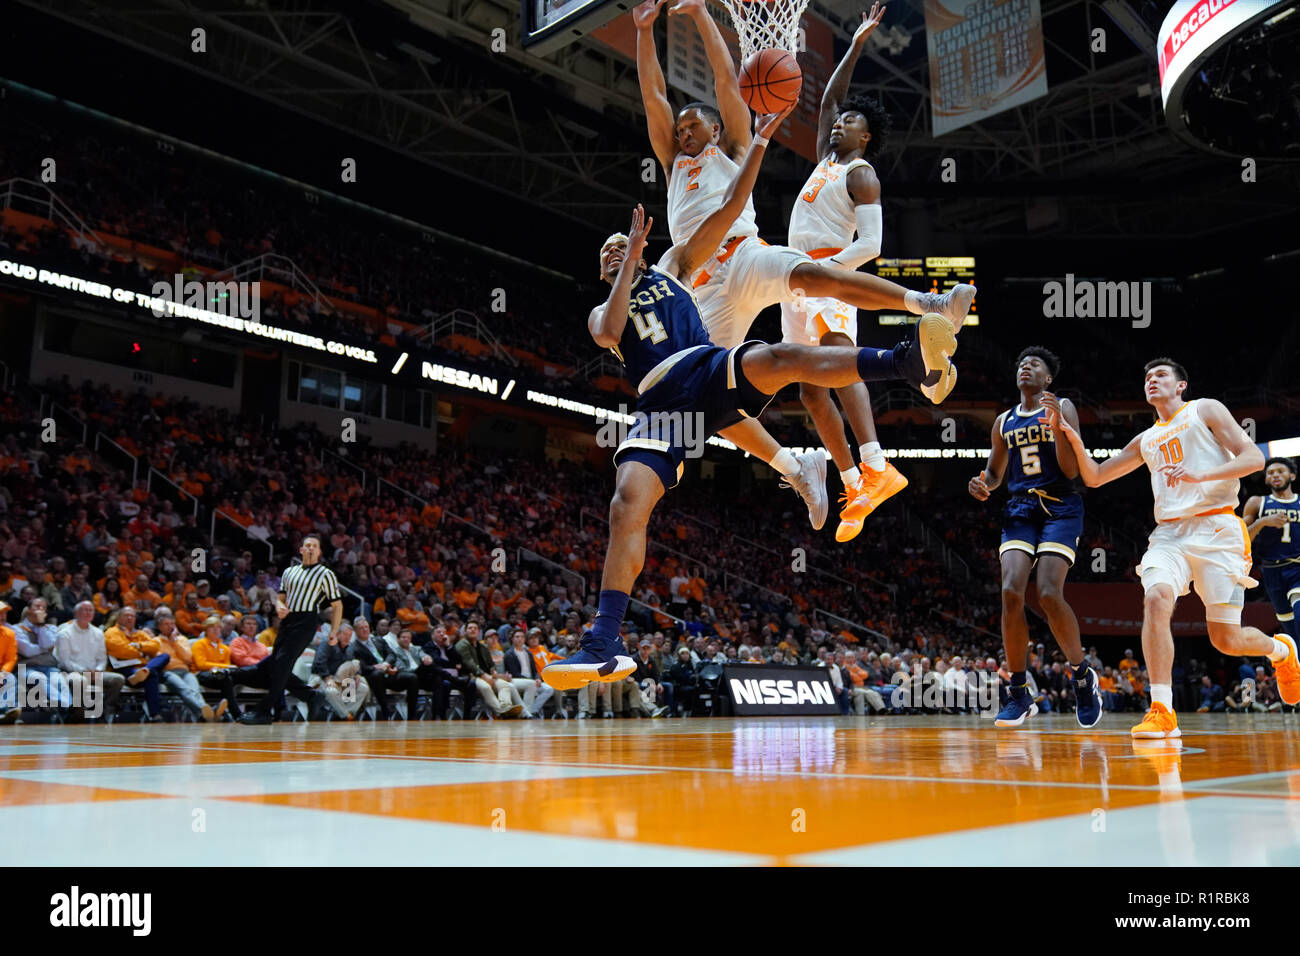 Knoxville, Tennessee, USA. 13th Nov, 2018. November 13, 2018: Brandon Alston #4 of the Georgia Tech Yellow Jackets is fouled by Grant Williams #2 of the Tennessee Volunteers during the NCAA basketball game between the University of Tennessee Volunteers and the Georgia Tech Yellow Jackets at Thompson Boling Arena in Knoxville TN Tim Gangloff/CSM Credit: Cal Sport Media/Alamy Live News Stock Photo